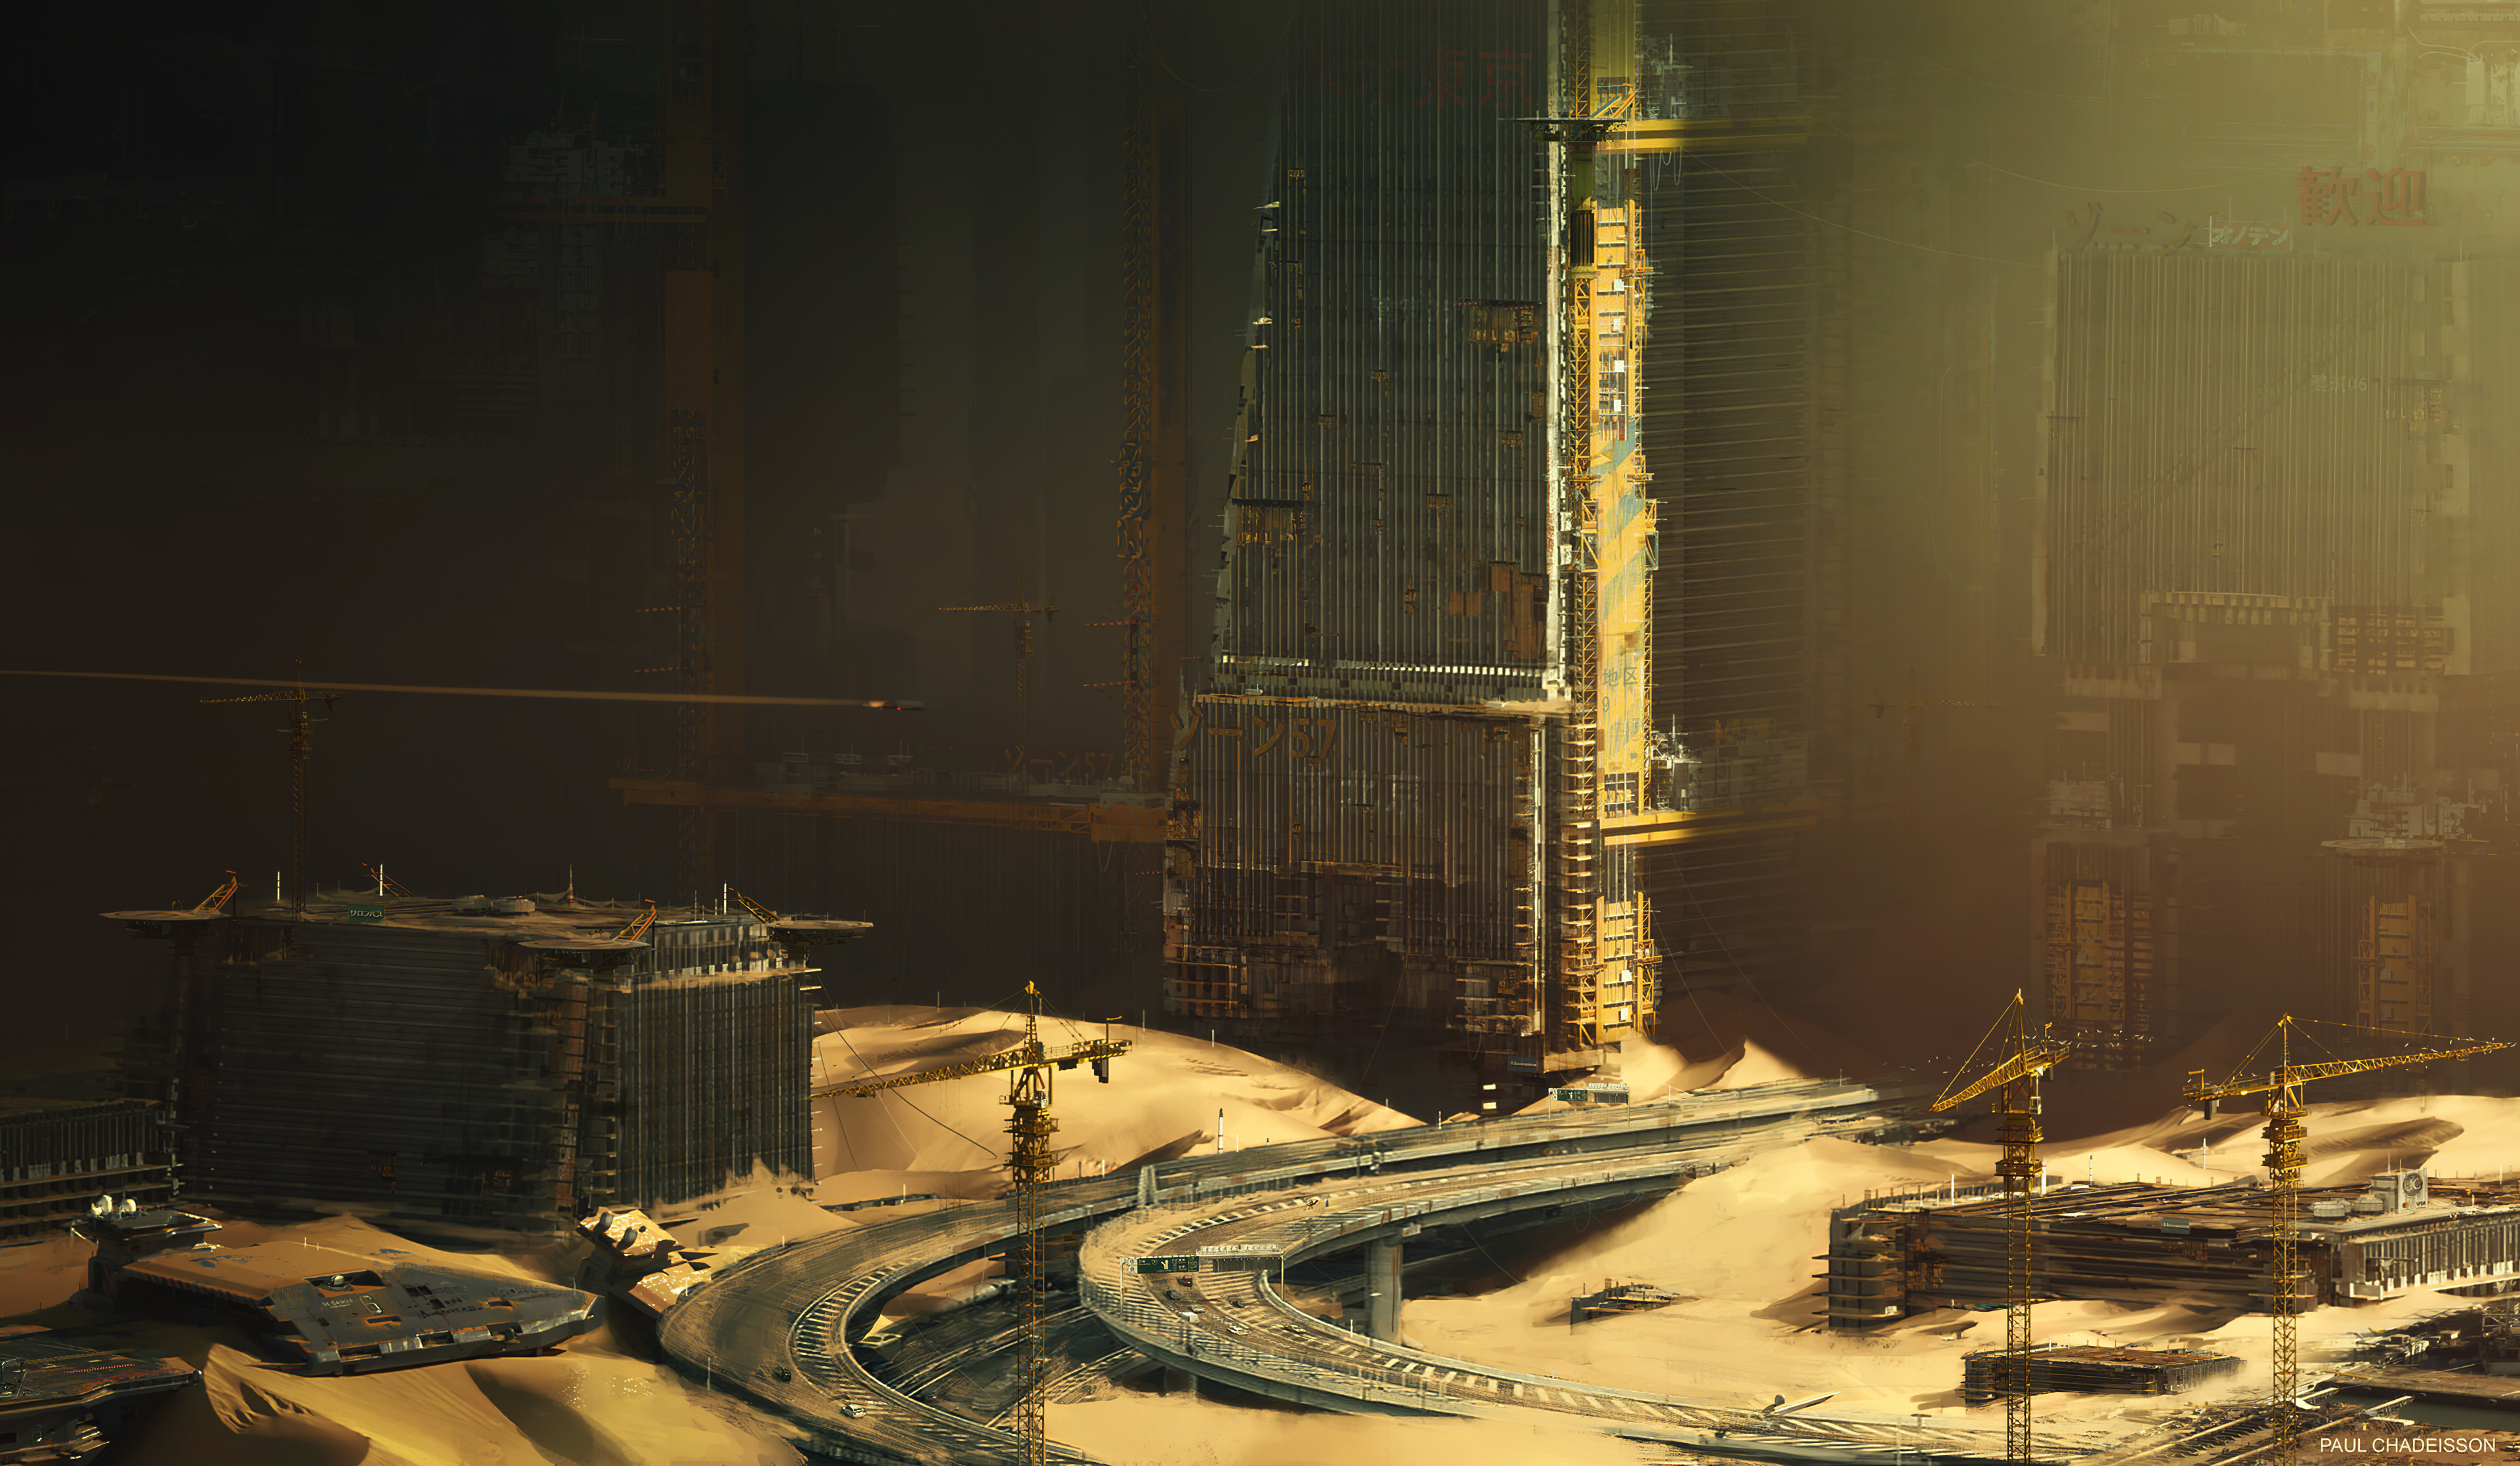 Deserted City Building Construction Futuristic Paul Chadeisson Abandoned City Abandoned 3840x2234